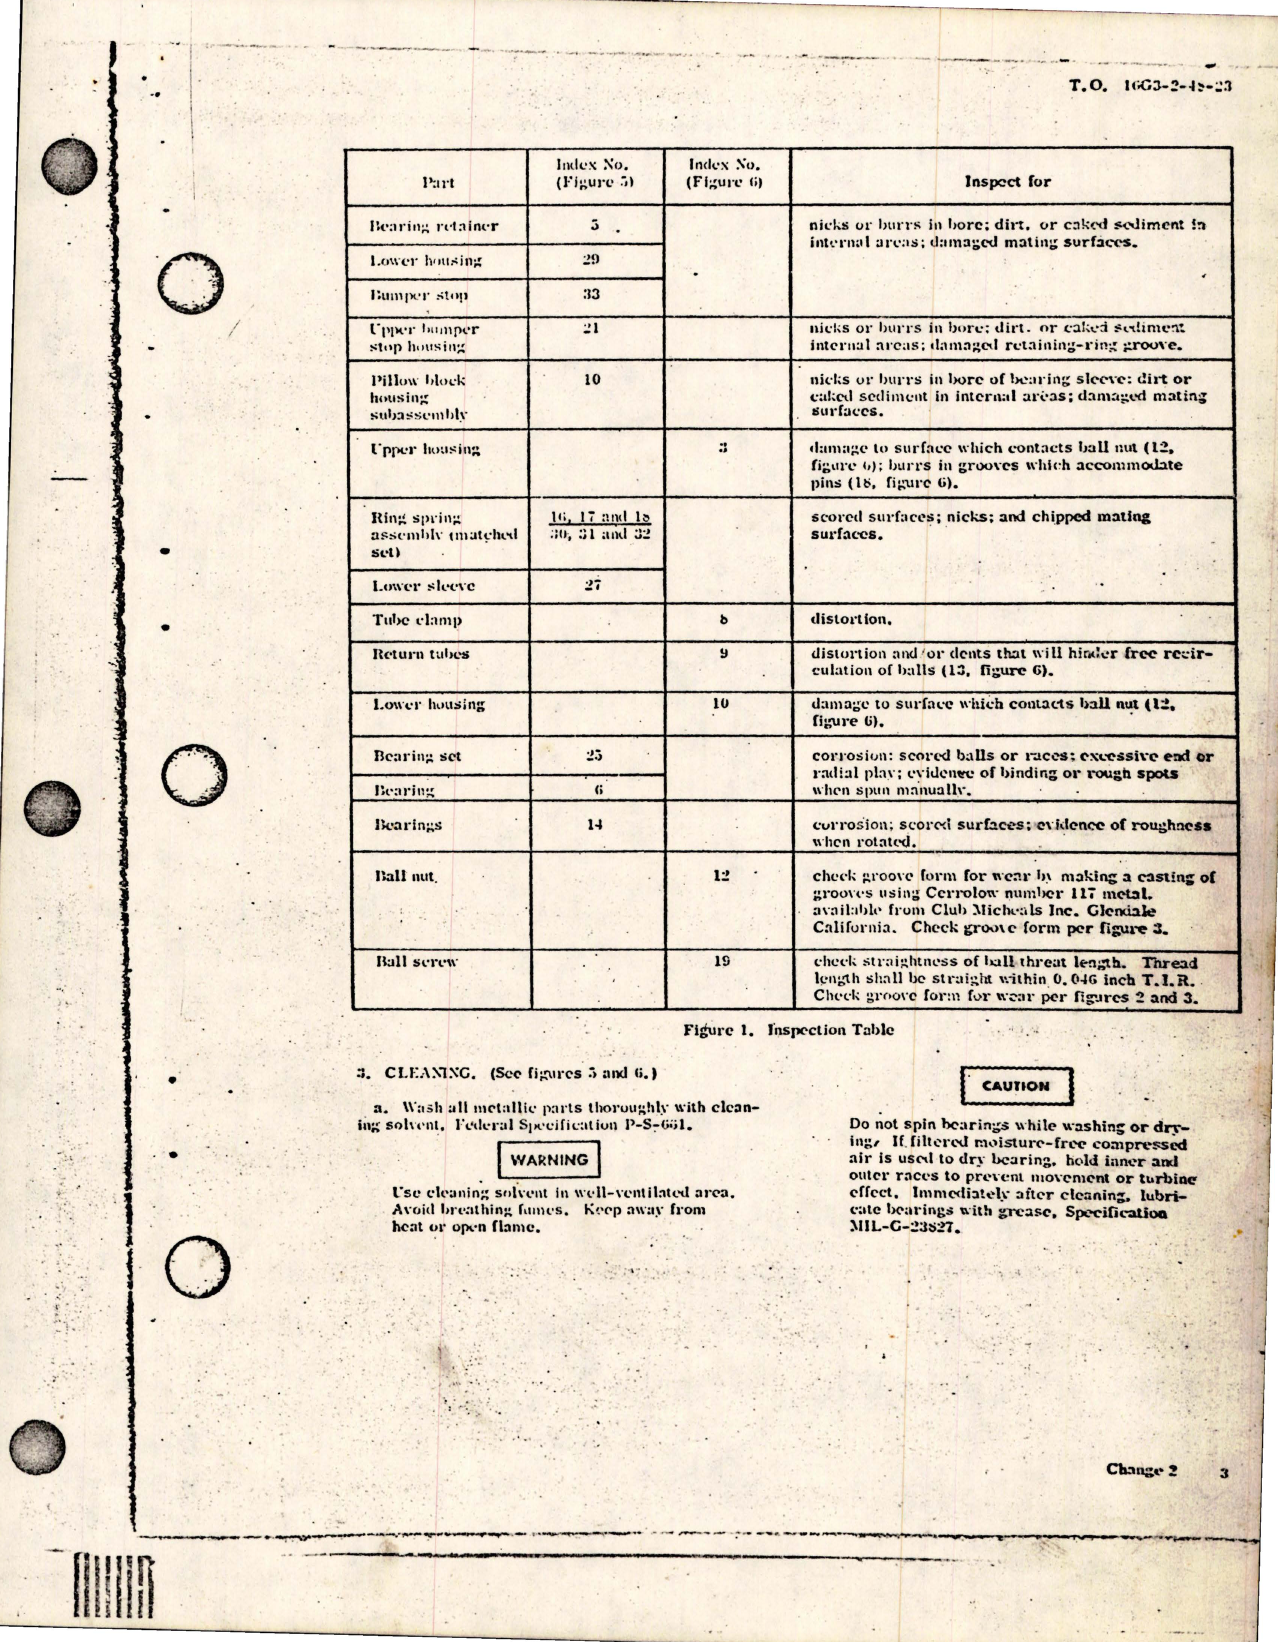 Sample page 5 from AirCorps Library document: Overhaul with Parts Breakdown for Main Landing Gear Ball Screw Assembly - Part 1650E412 - Change No. 2 